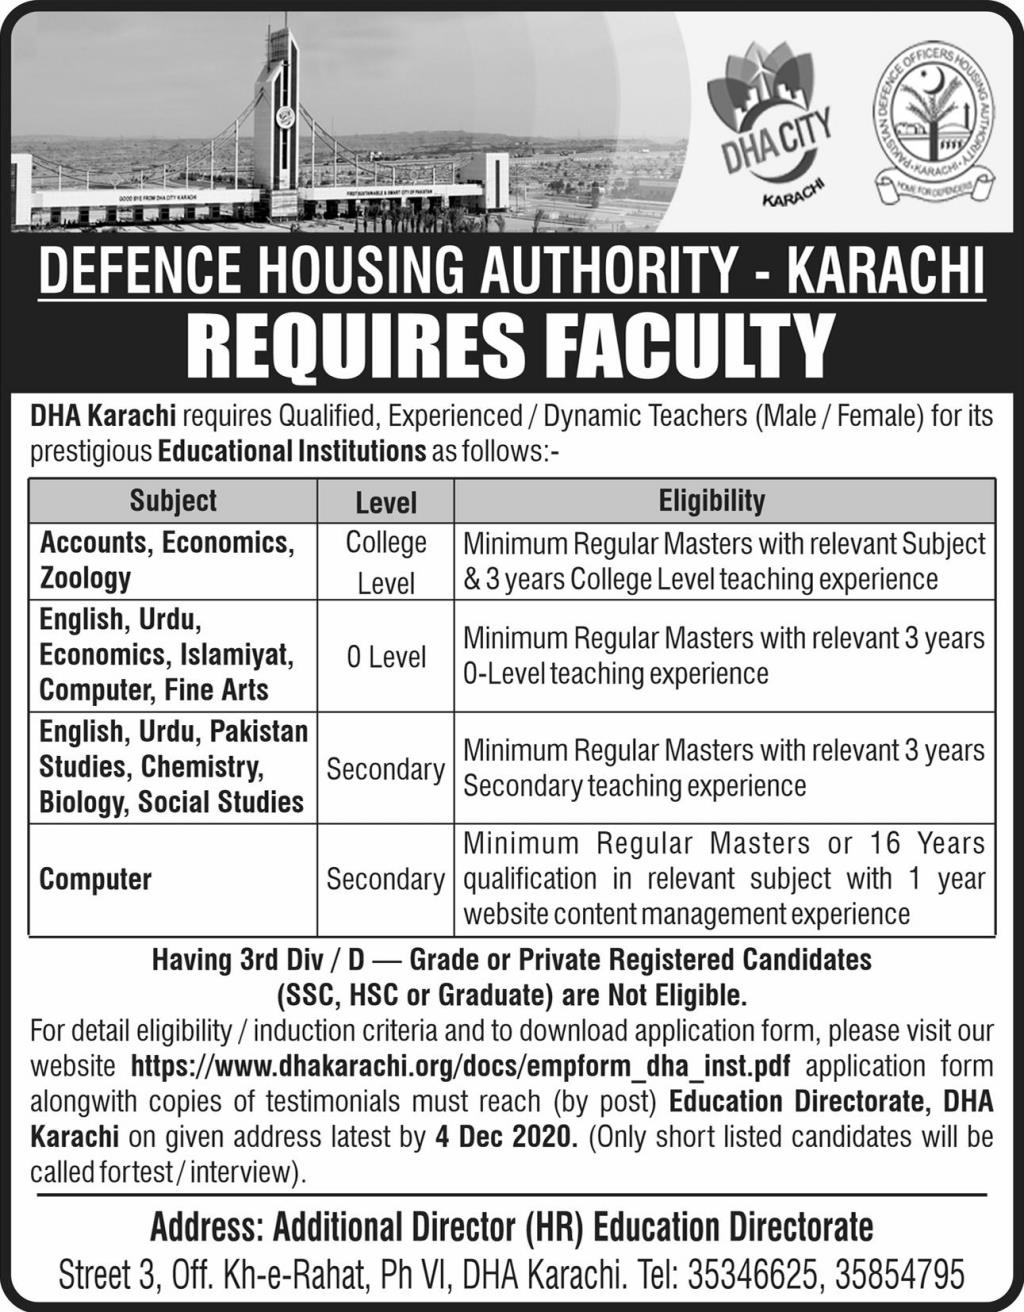 DHA Karachi Jobs in Defence Housing Authority